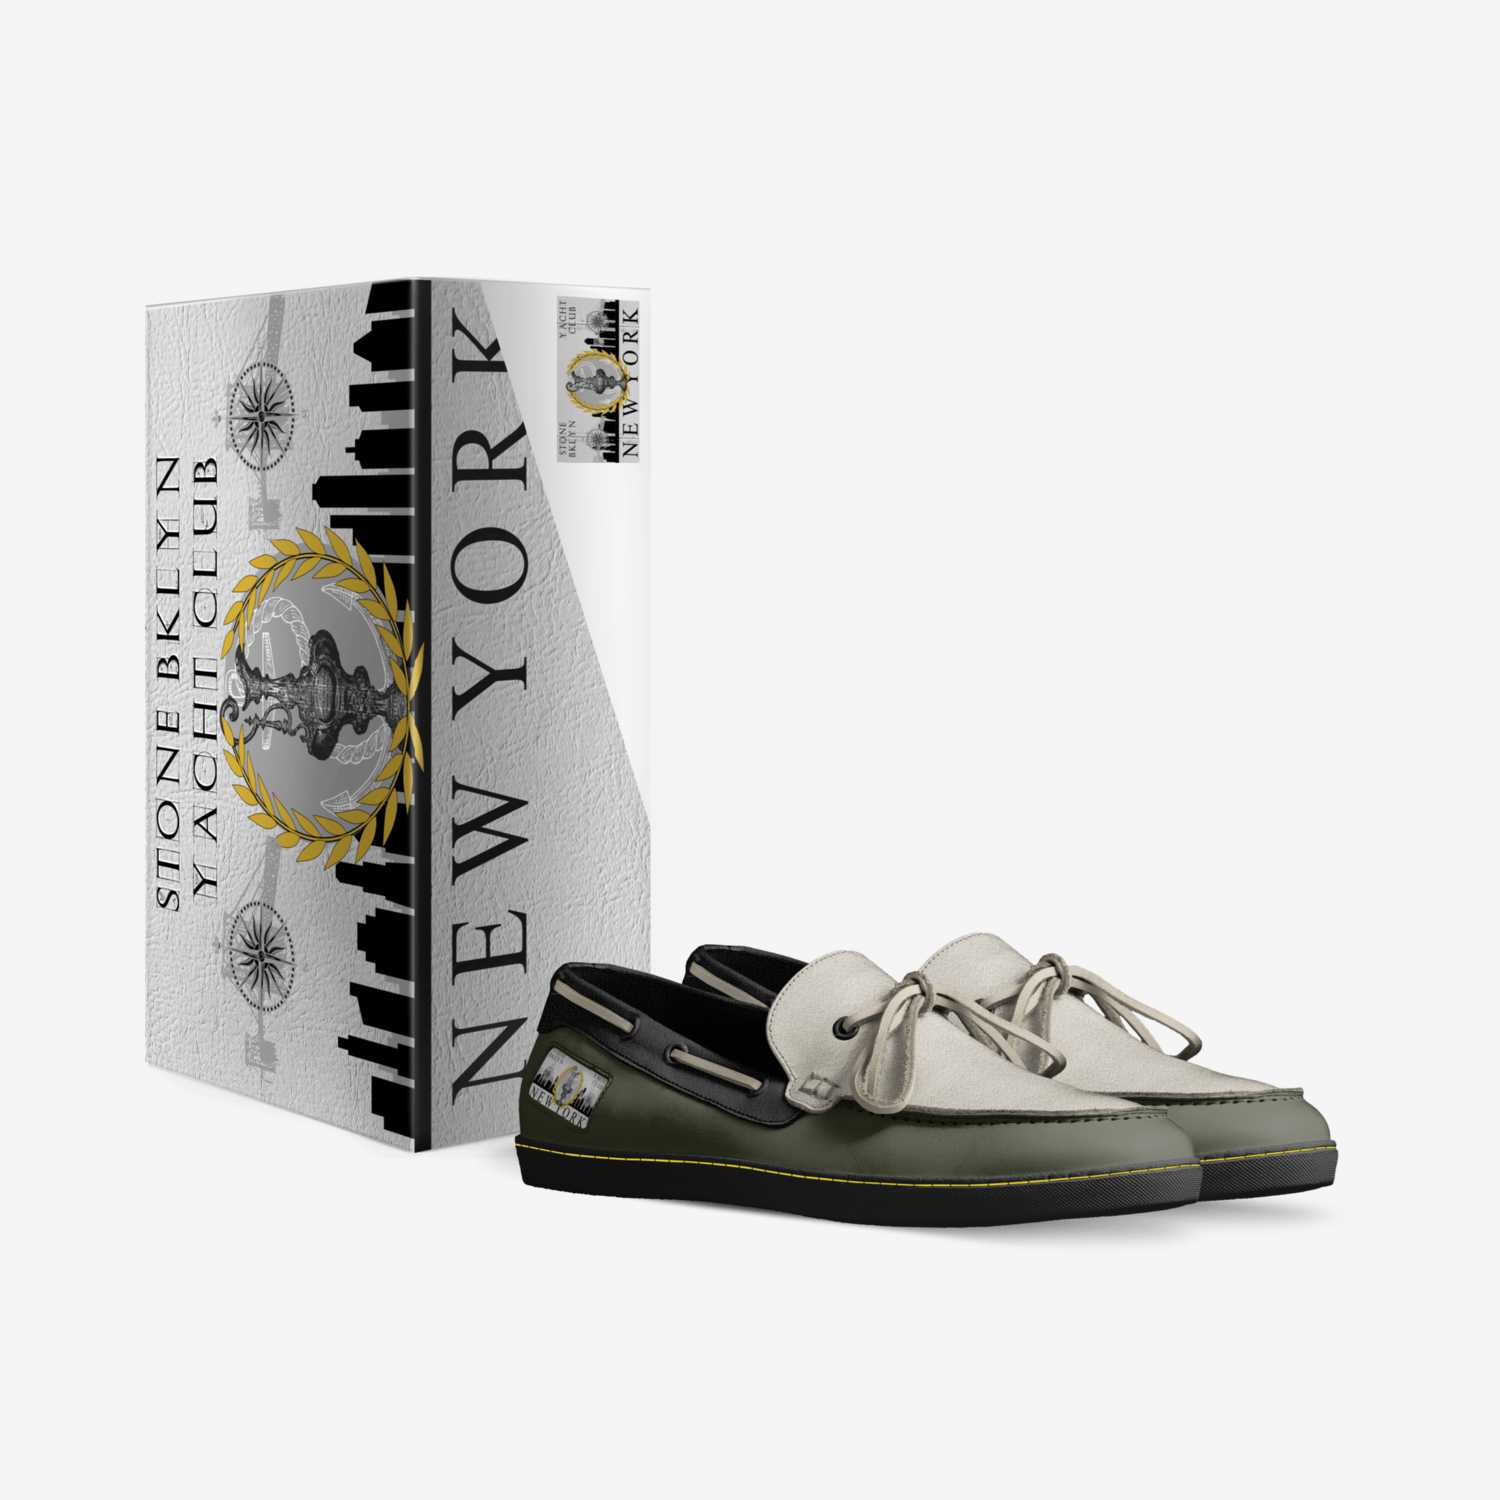 BKLYN Boater custom made in Italy shoes by Kevin Marron | Box view